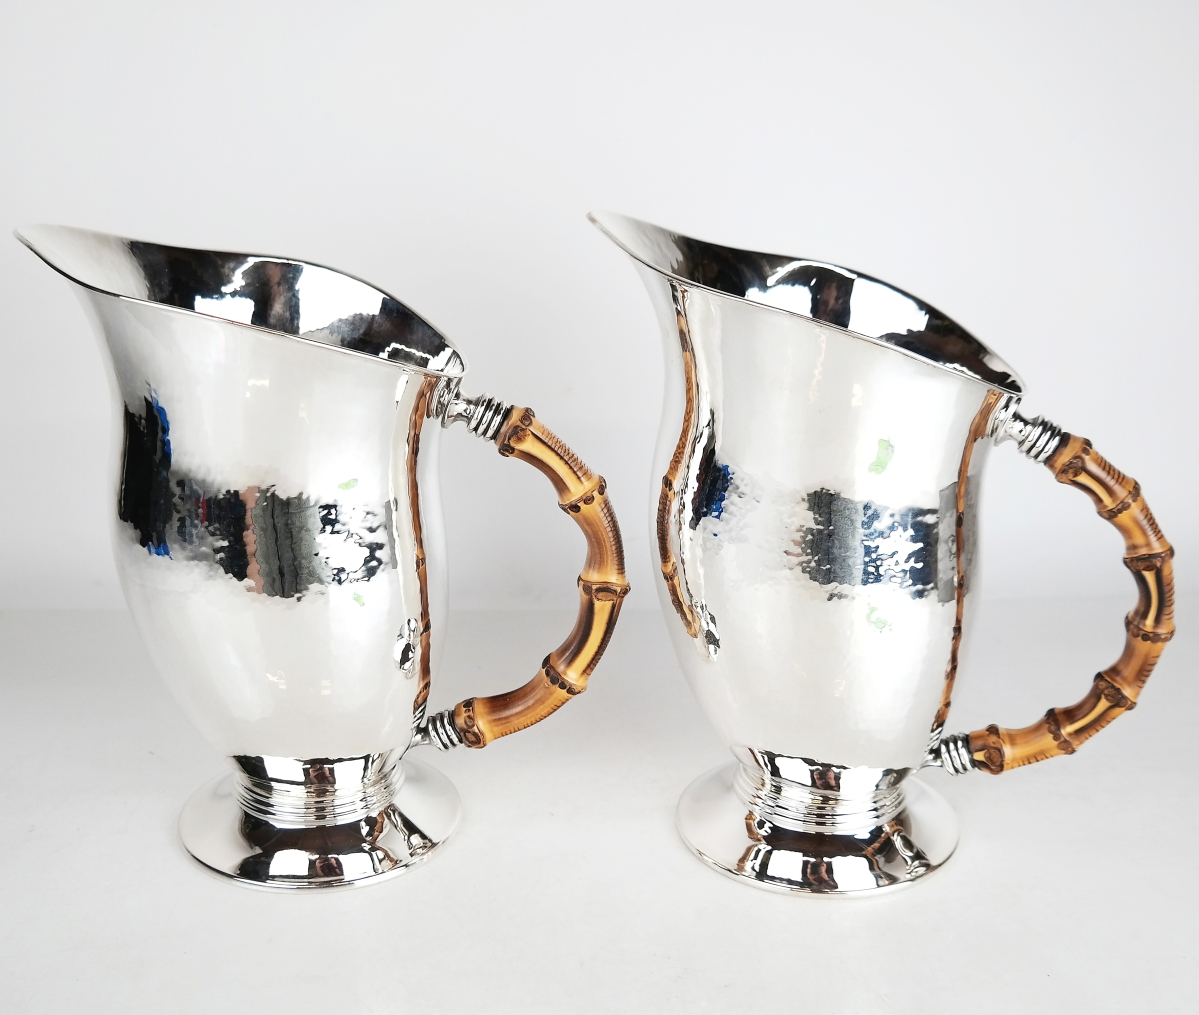 Pair of Buccellati silver water pitchers, Italian sterling silver water pitchers by Buccellati, with bamboo handles